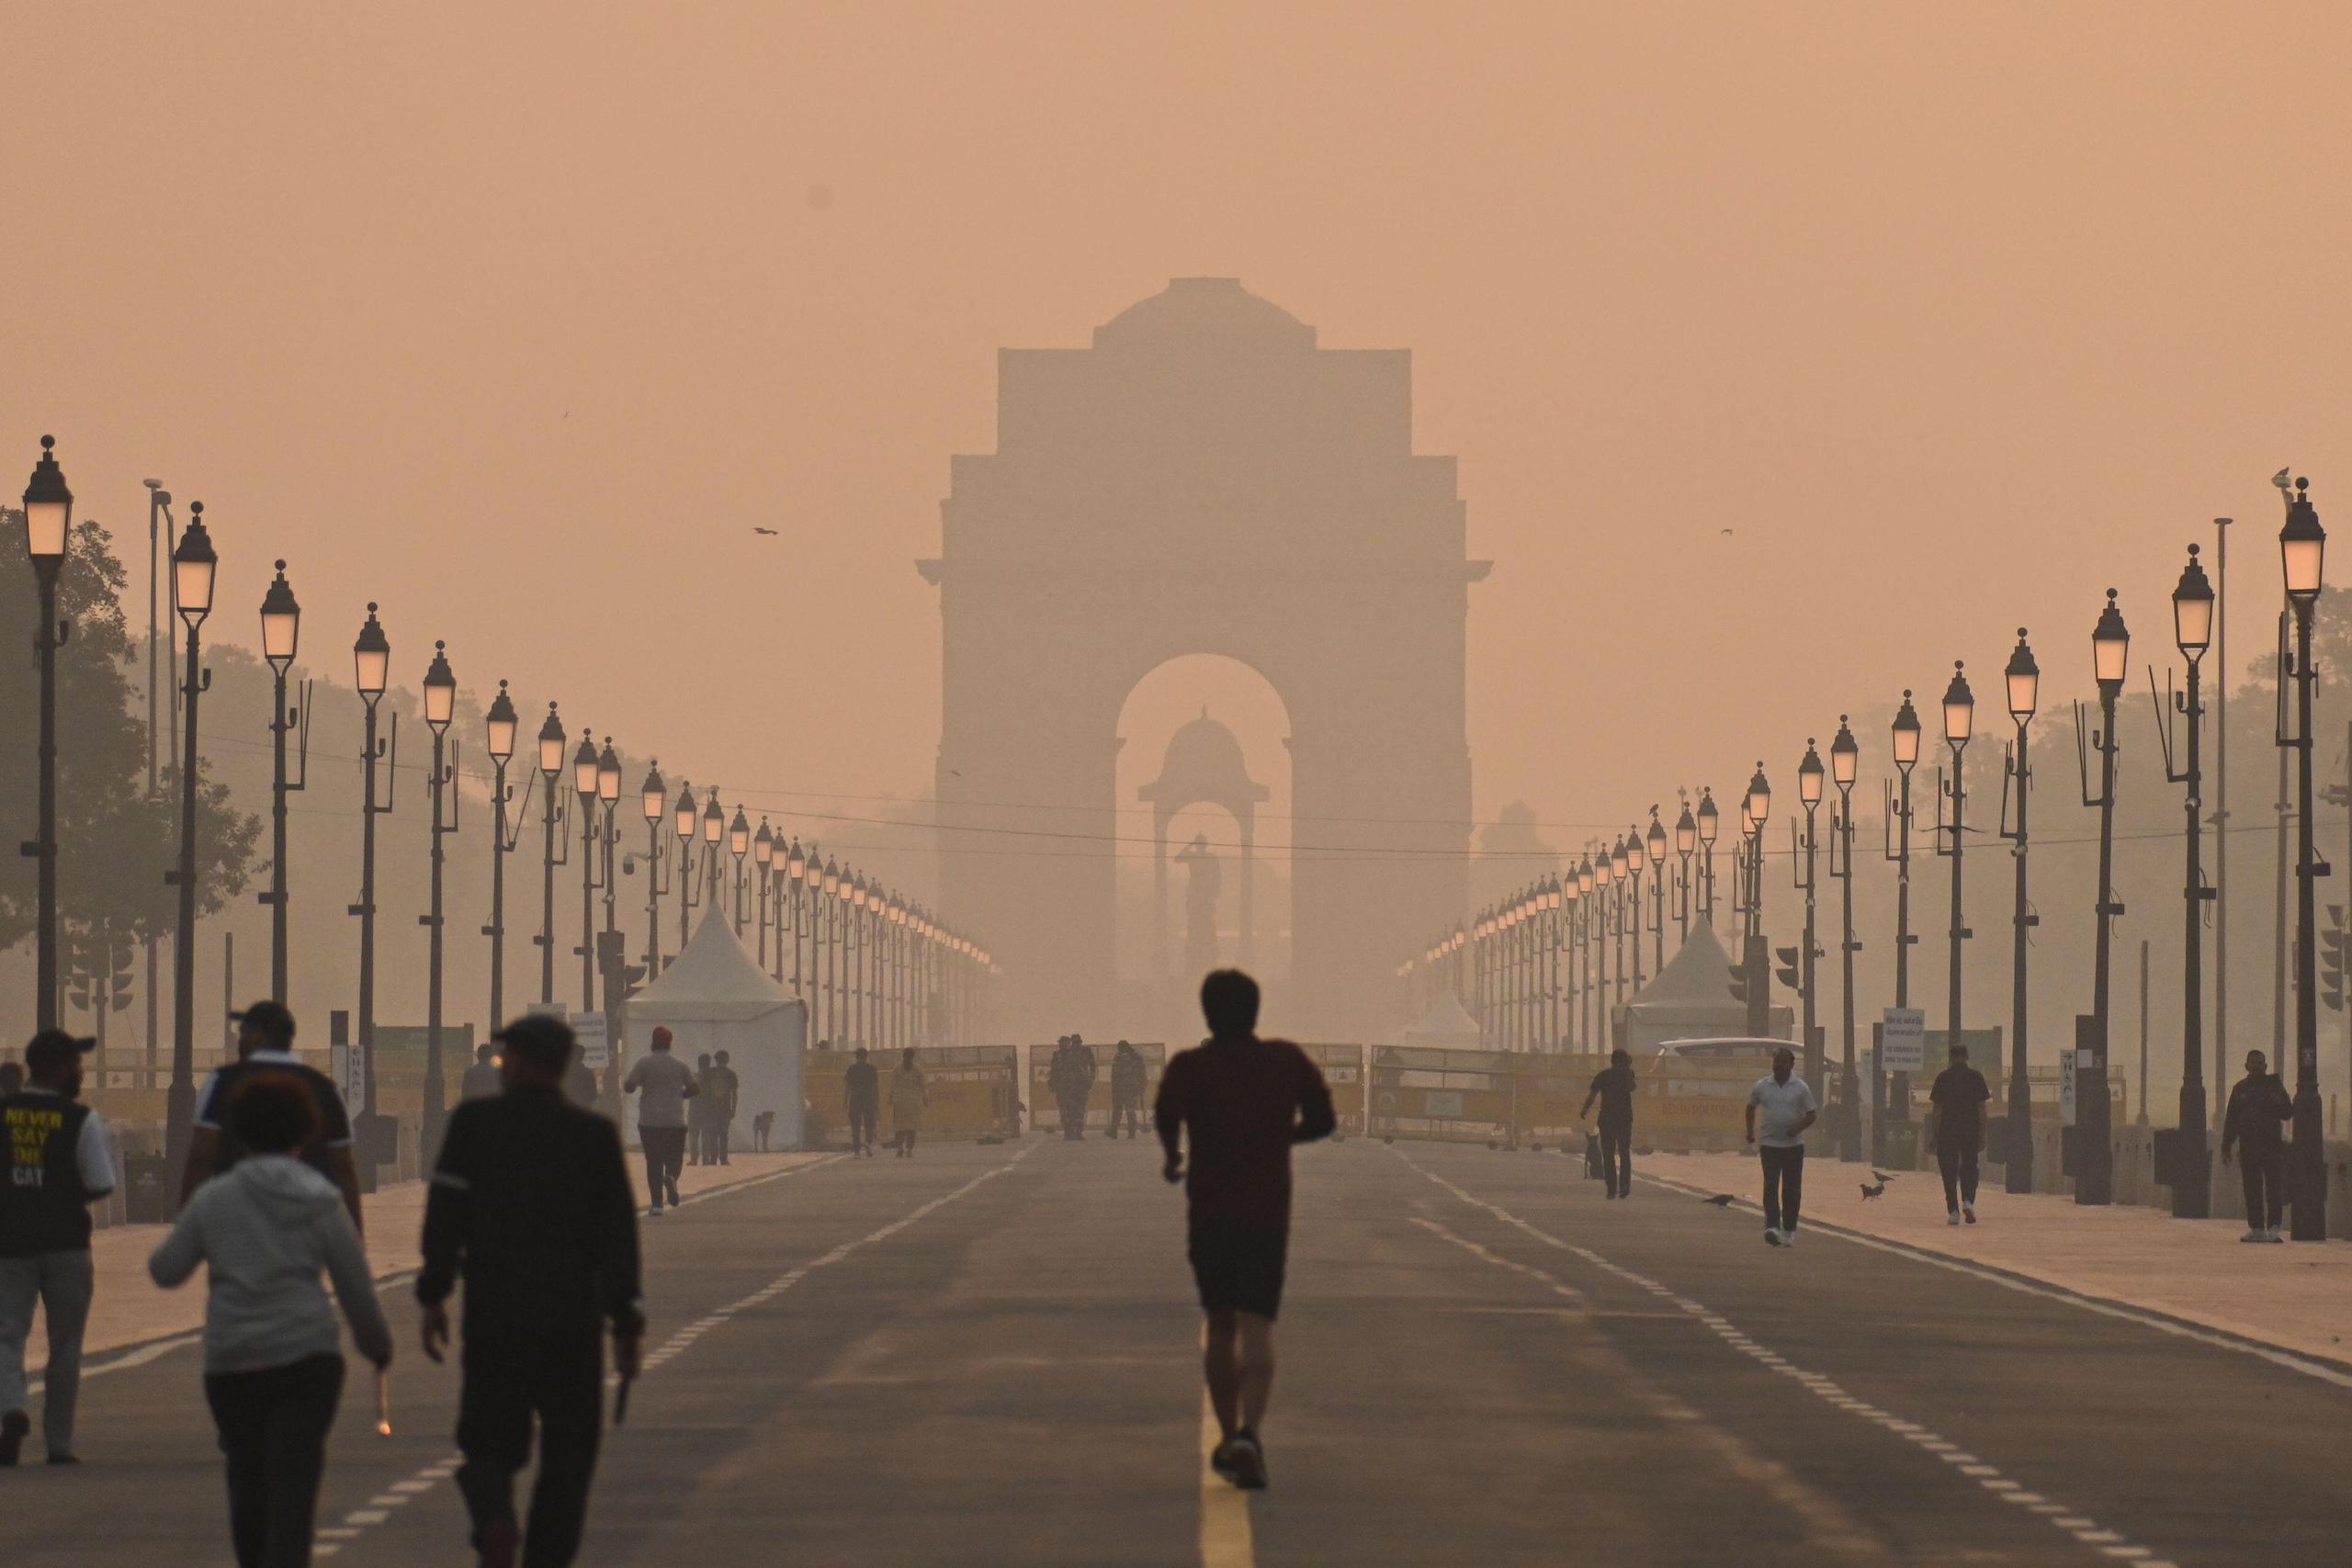 people exercise in yellow smog, with ornate archway in background